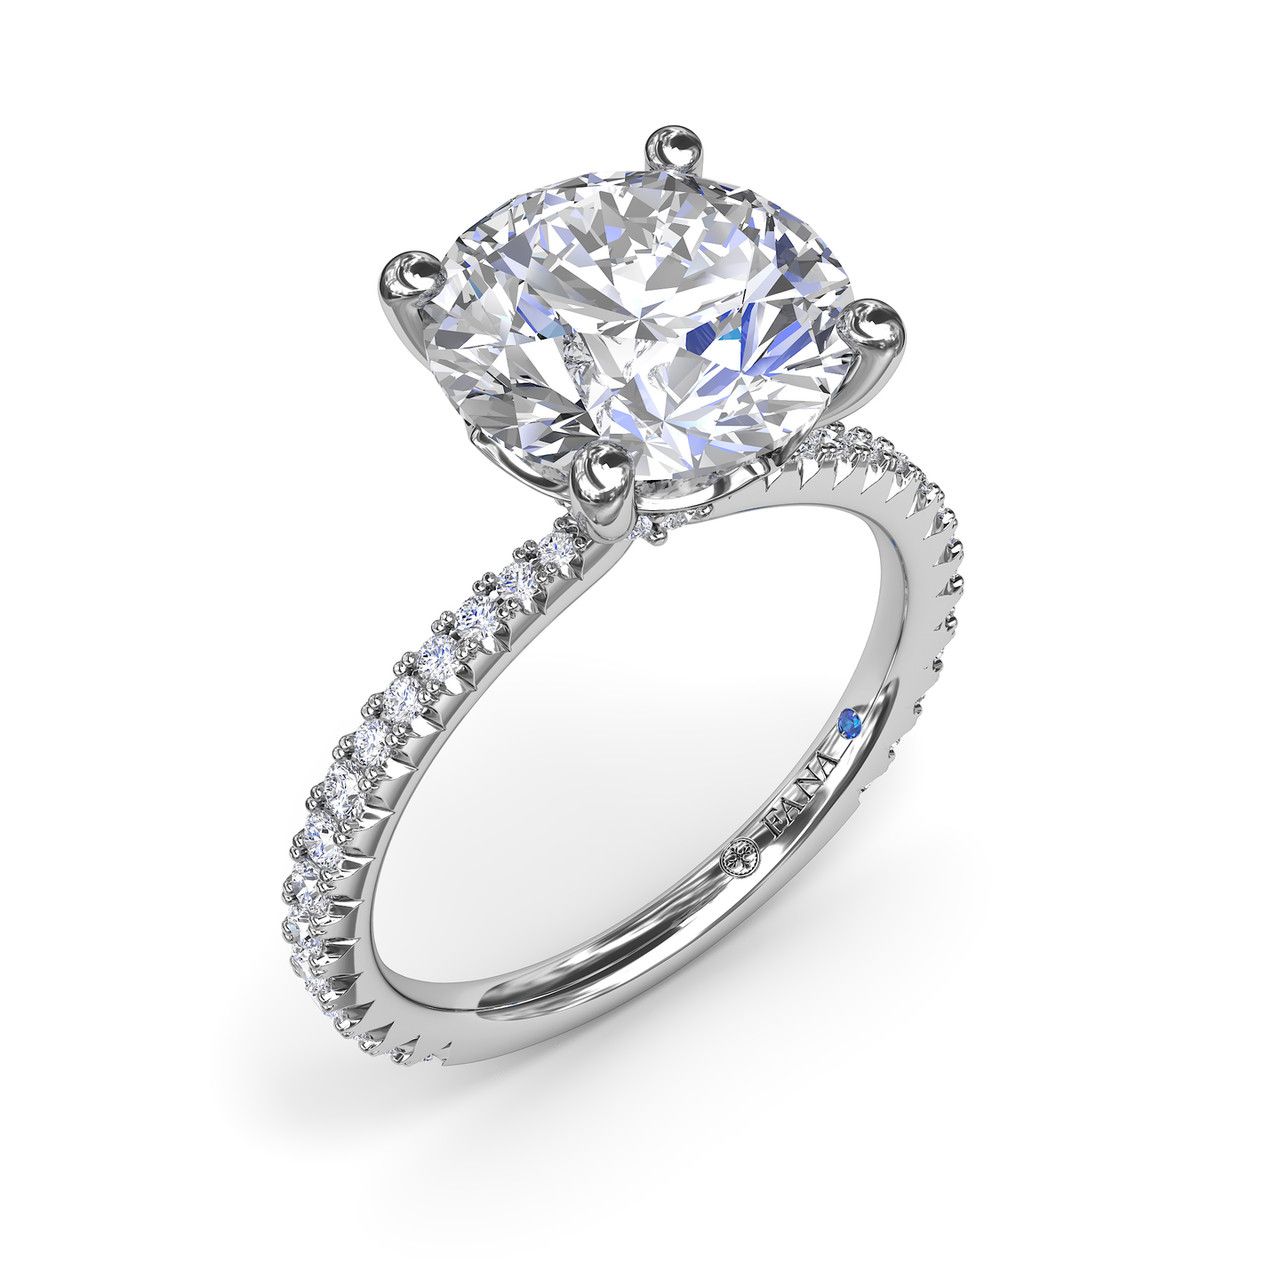 14K WHITE GOLD SEMI-MOUNT RING SIZE 6.5 WITH 38=0.40TW ROUND G-H VS2-SI1 DIAMONDS AND ONE ROUND BLUE SAPPHIRE  (3.47 GRAMS)